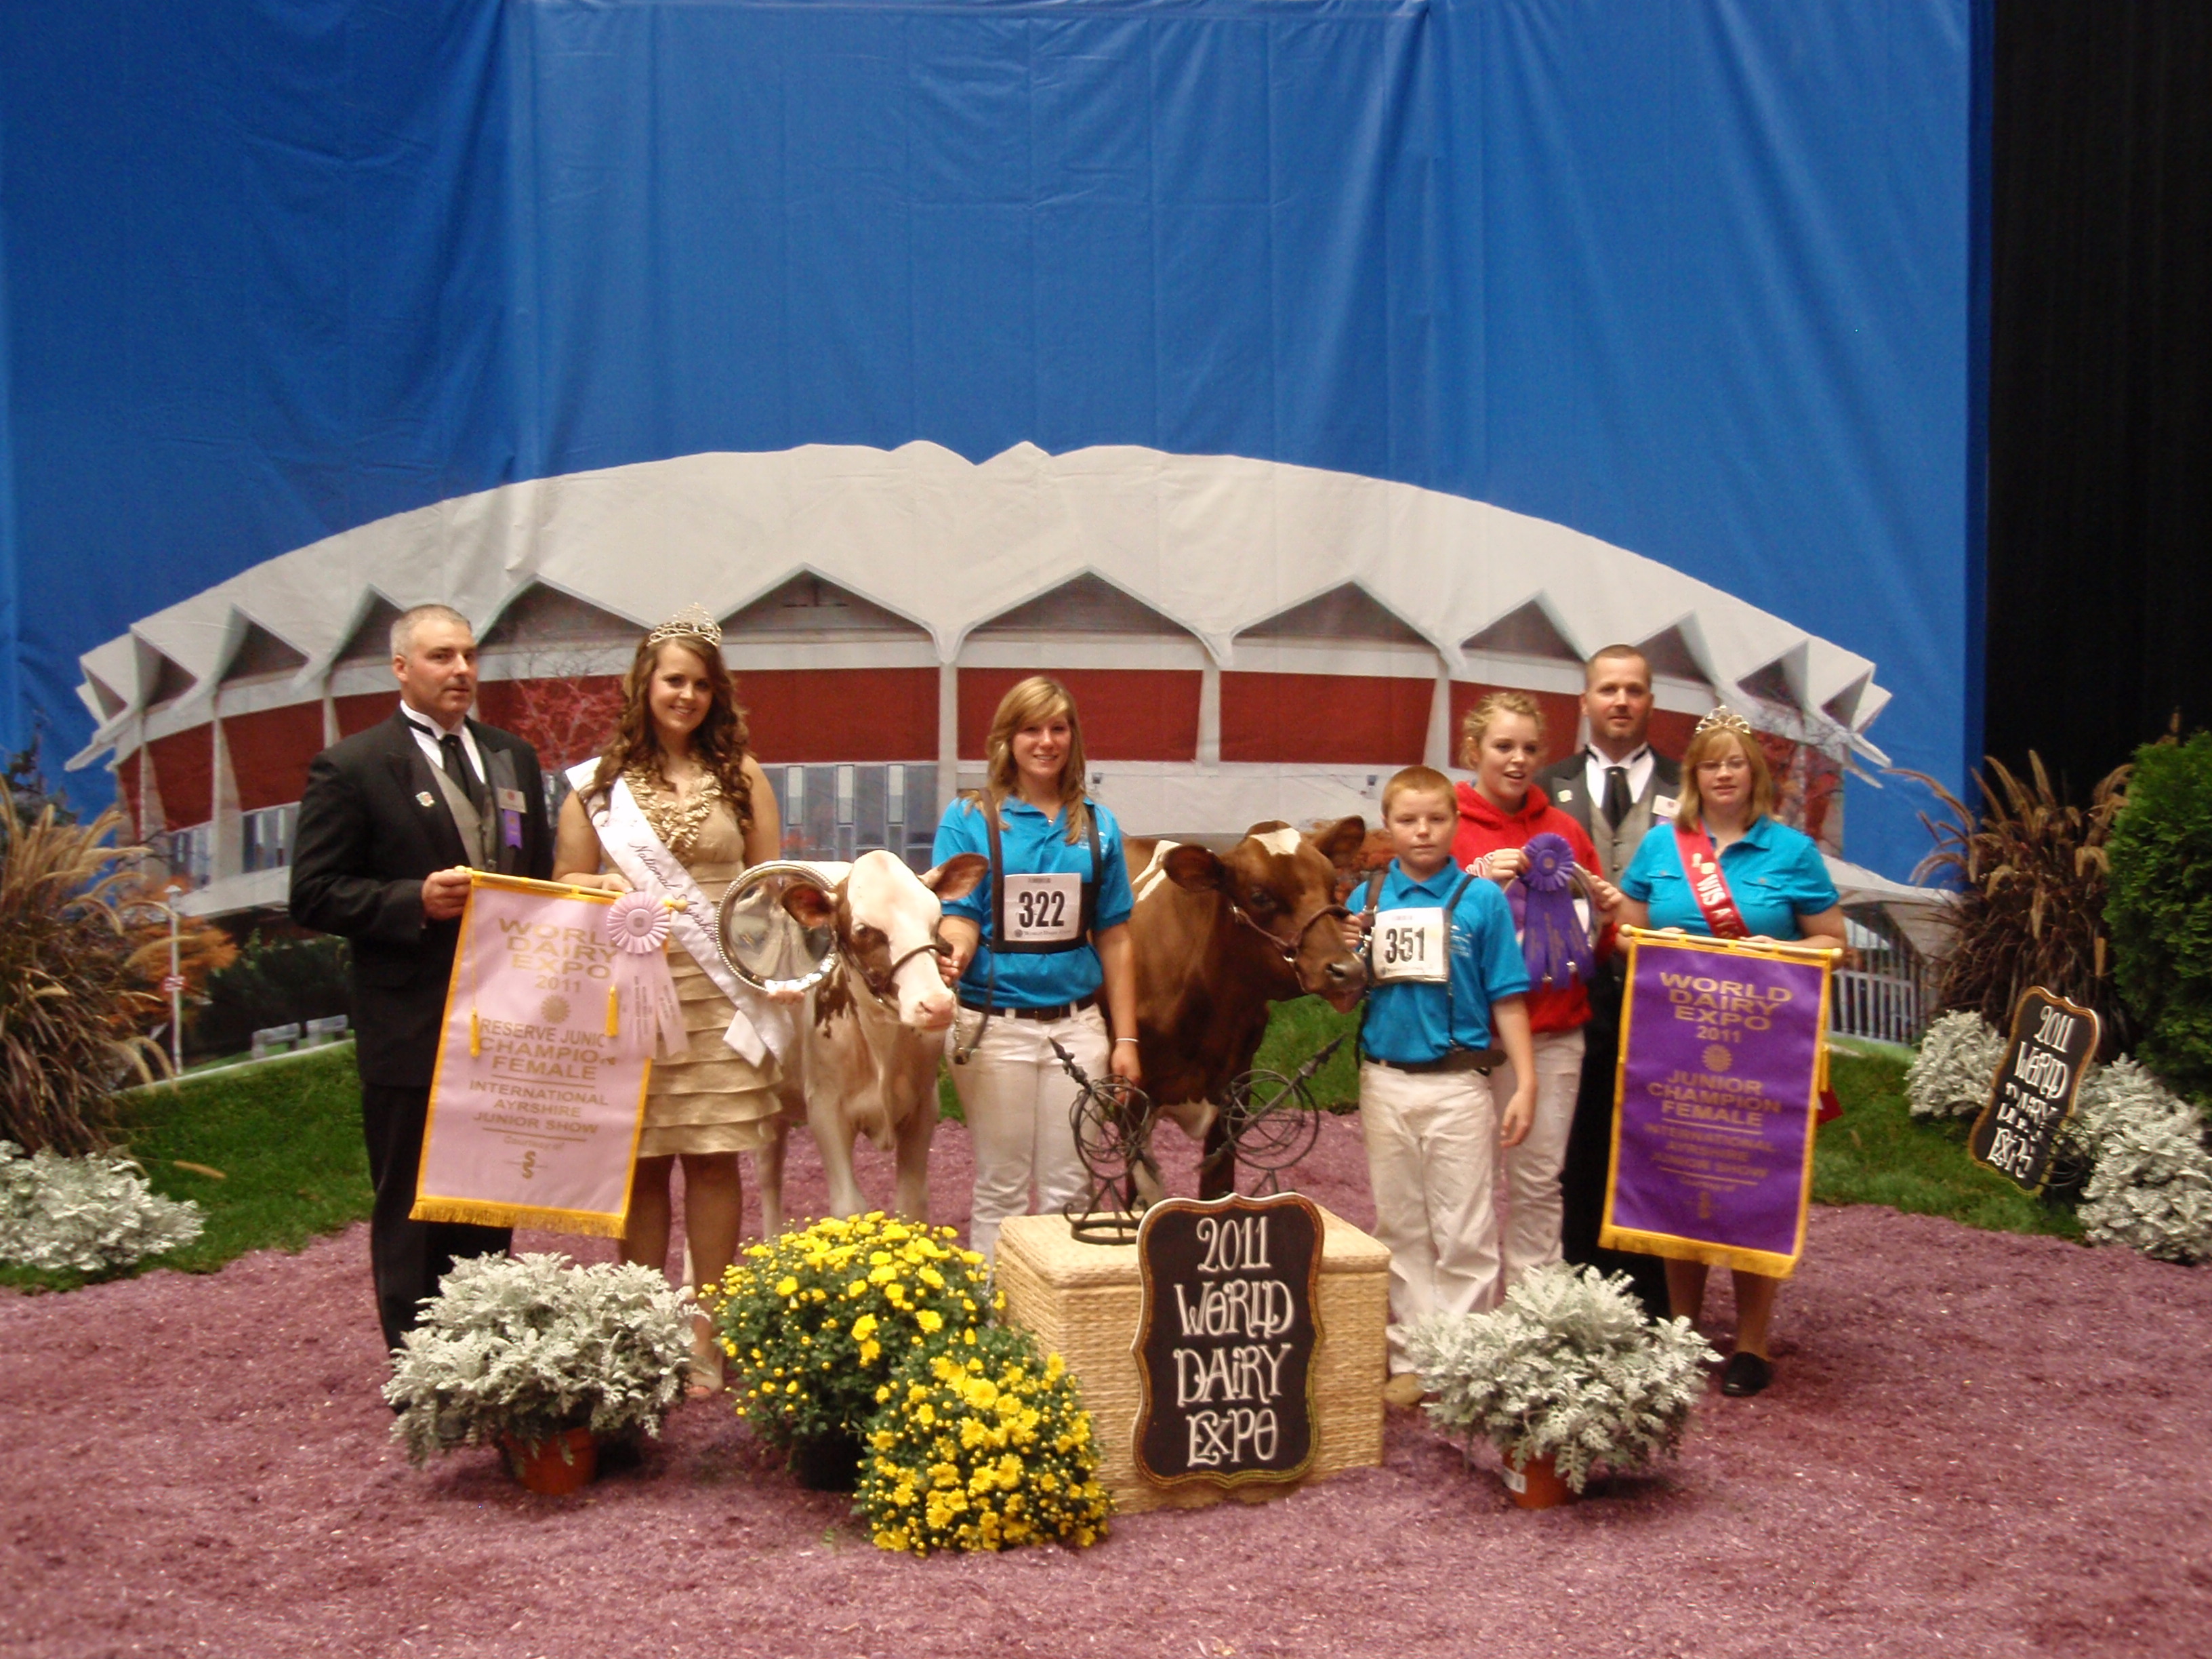 Darcy was Reserve Junior Champion (Junior Show) at the 2011 WDE.